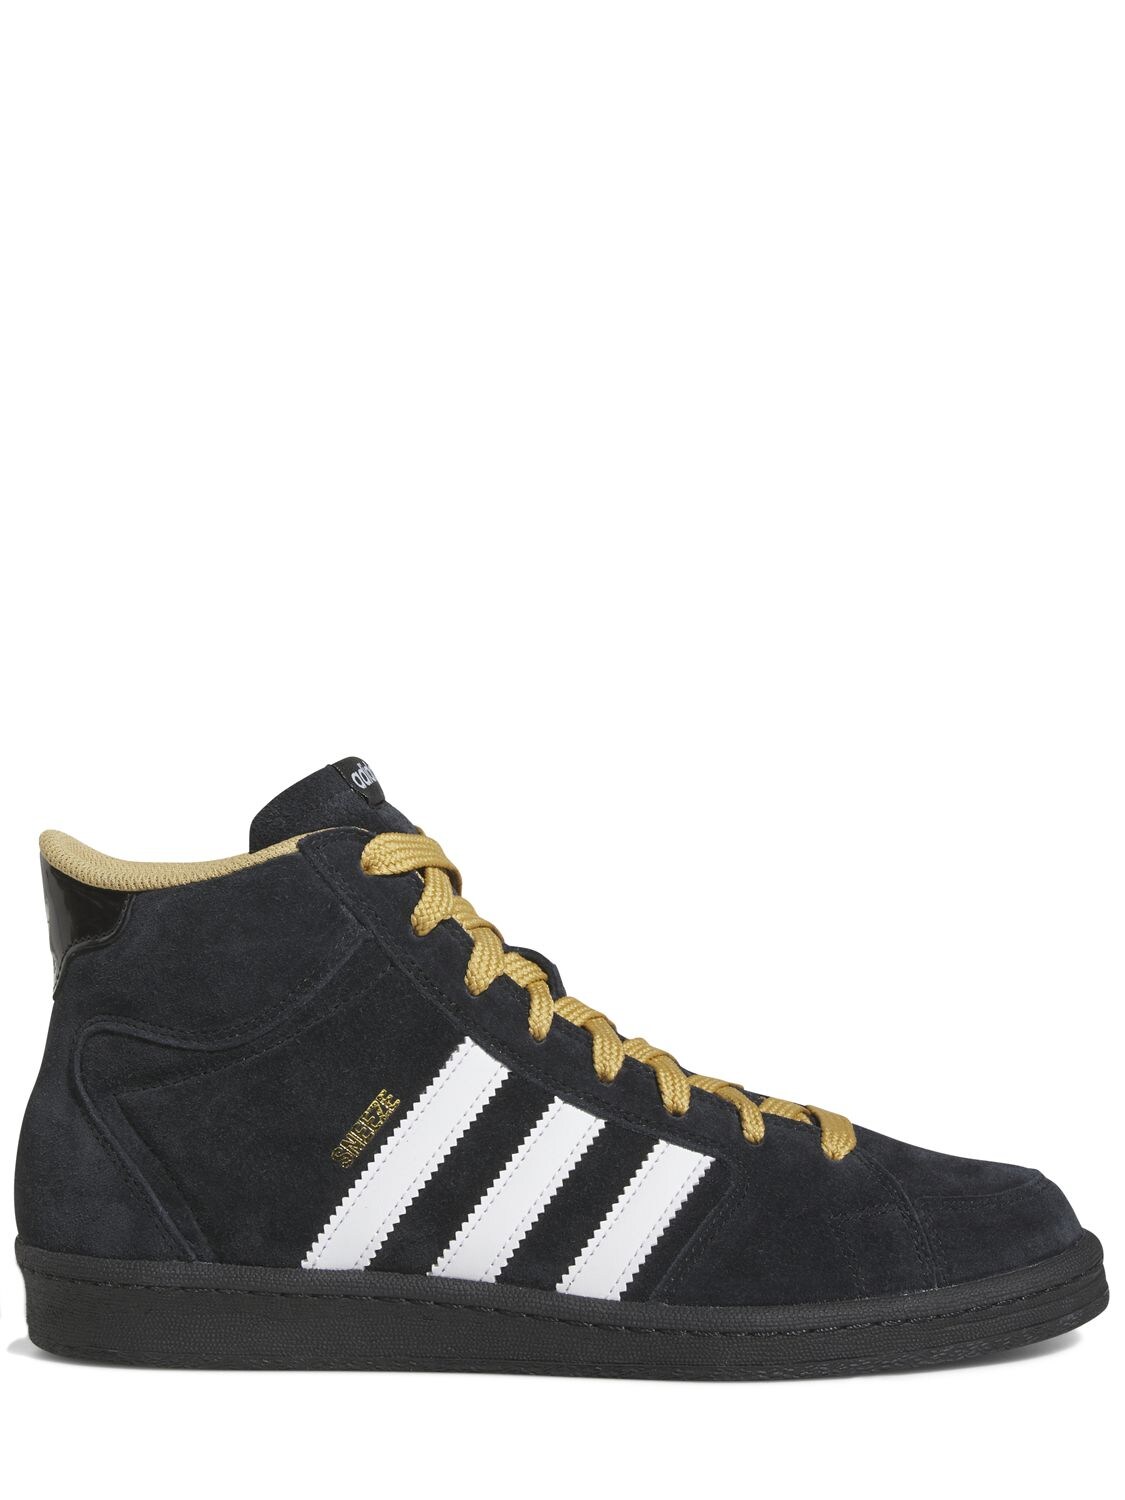 Adidas Superskate Trainers In Black | ModeSens